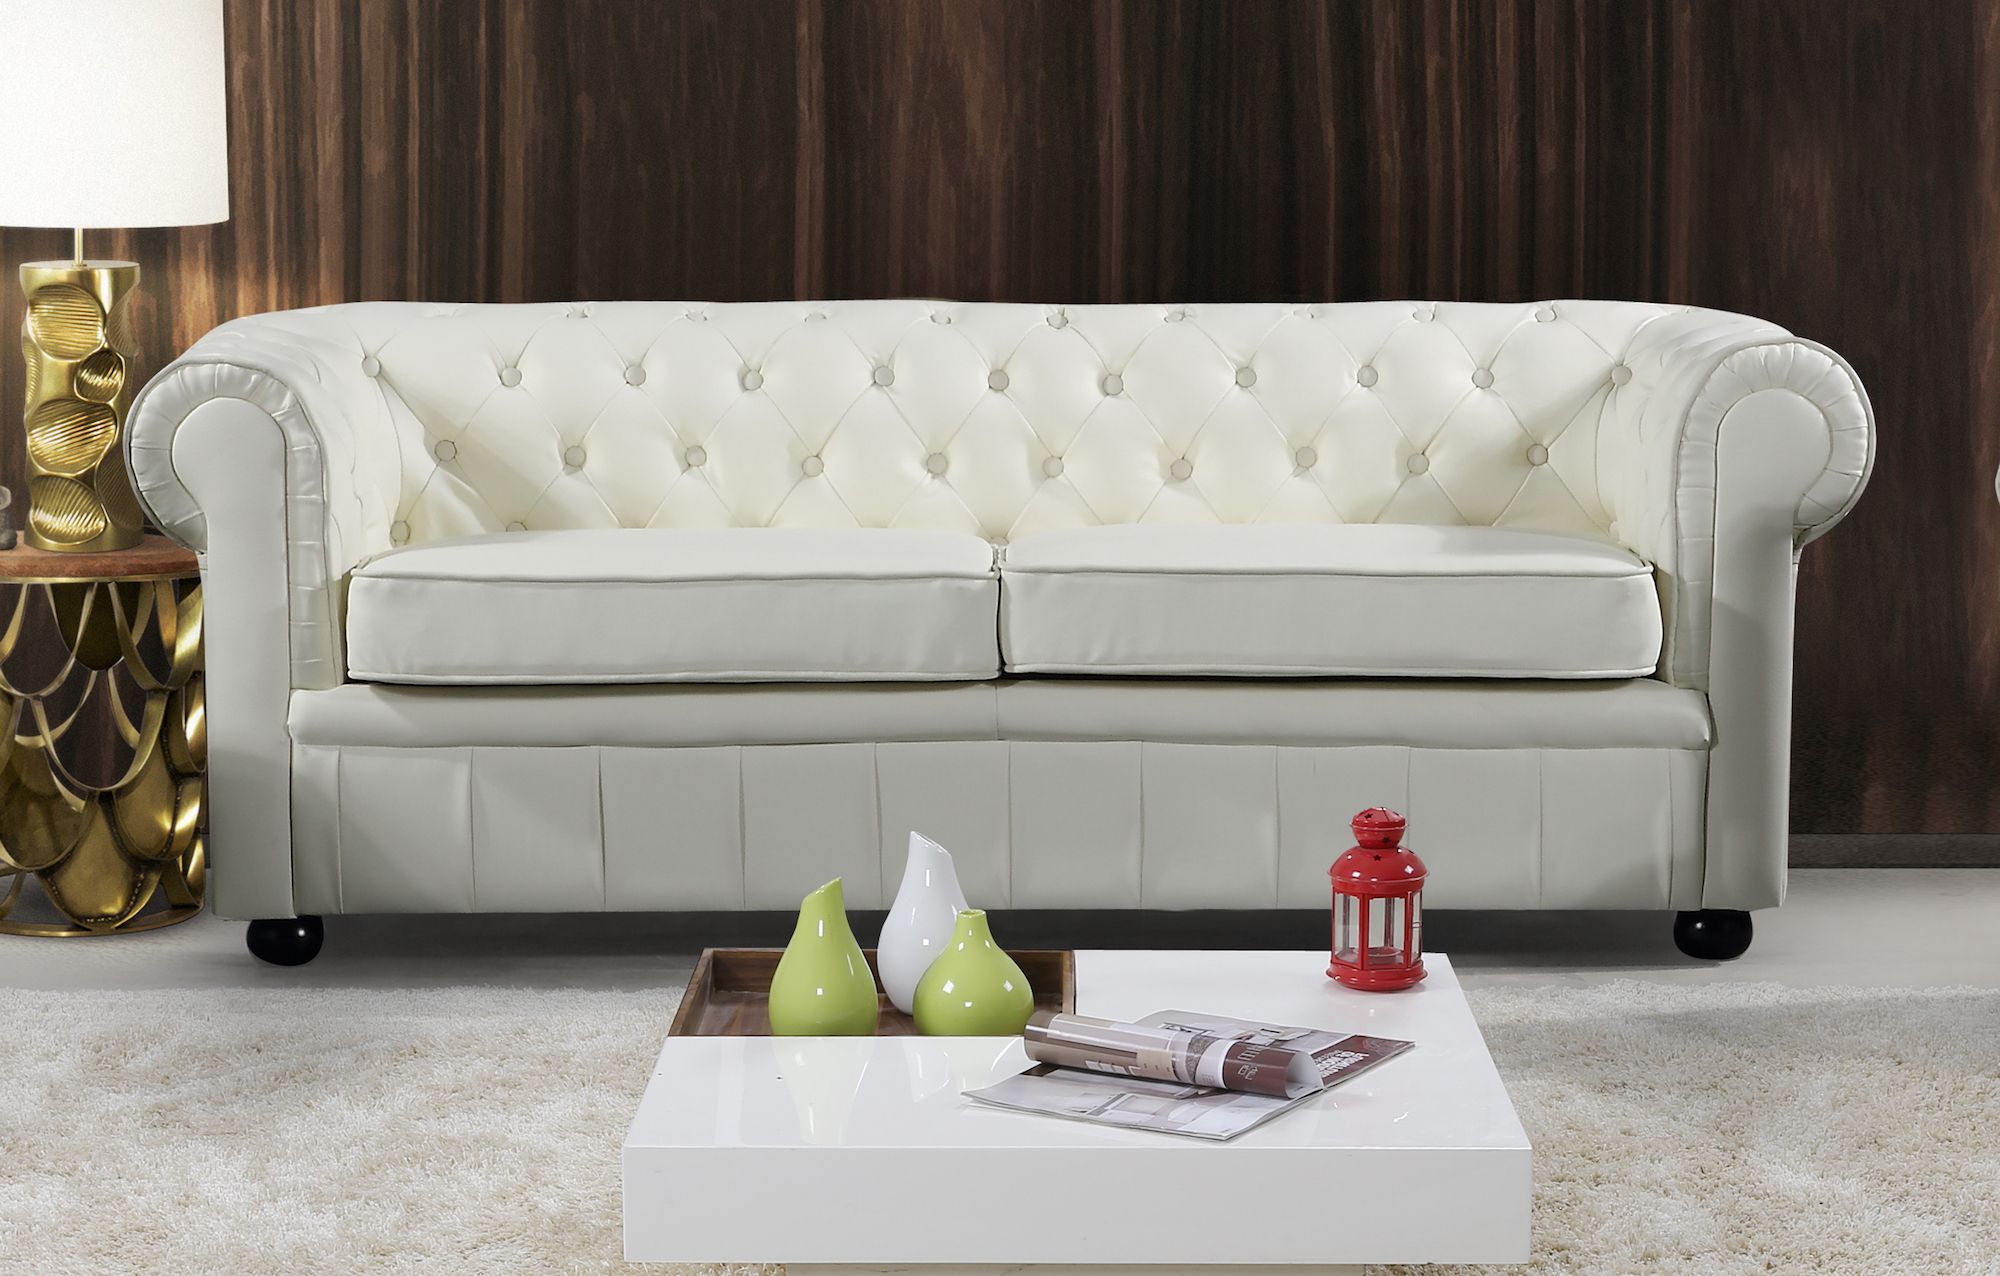 Modern Chesterfield Style Leather Sofa – Cream Leather Regarding Current Sofas In Cream (View 10 of 15)